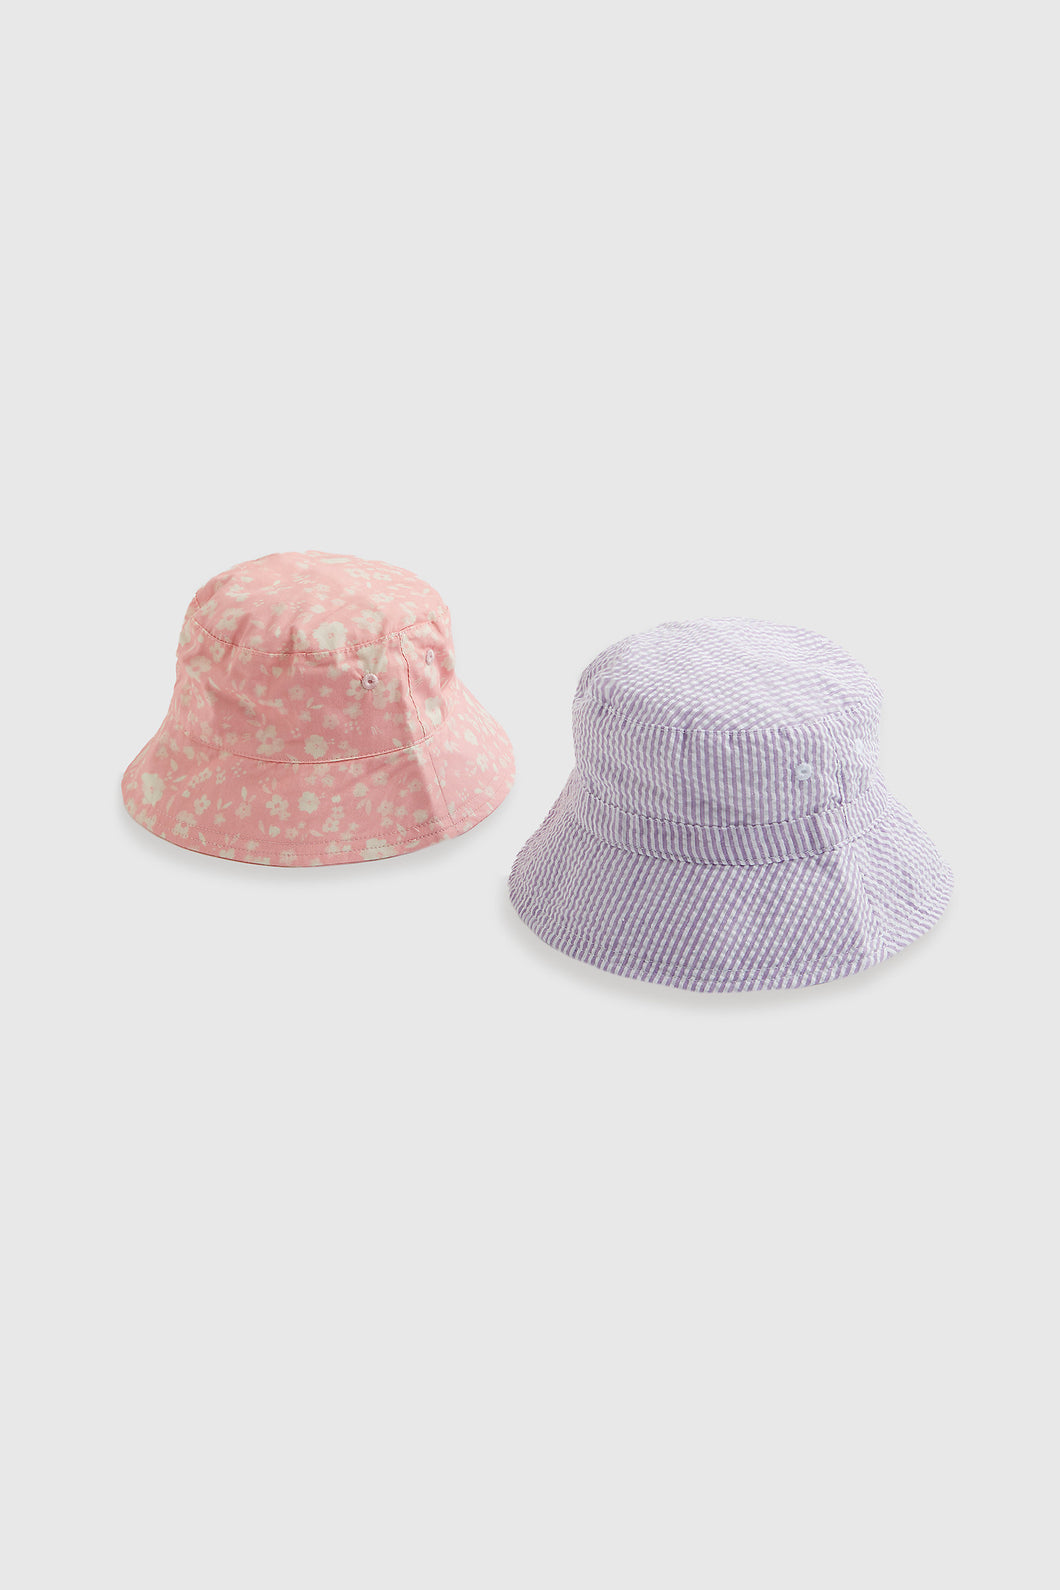 Mothercare Pink Sunsafe Fisherman Hats - 2 Pack